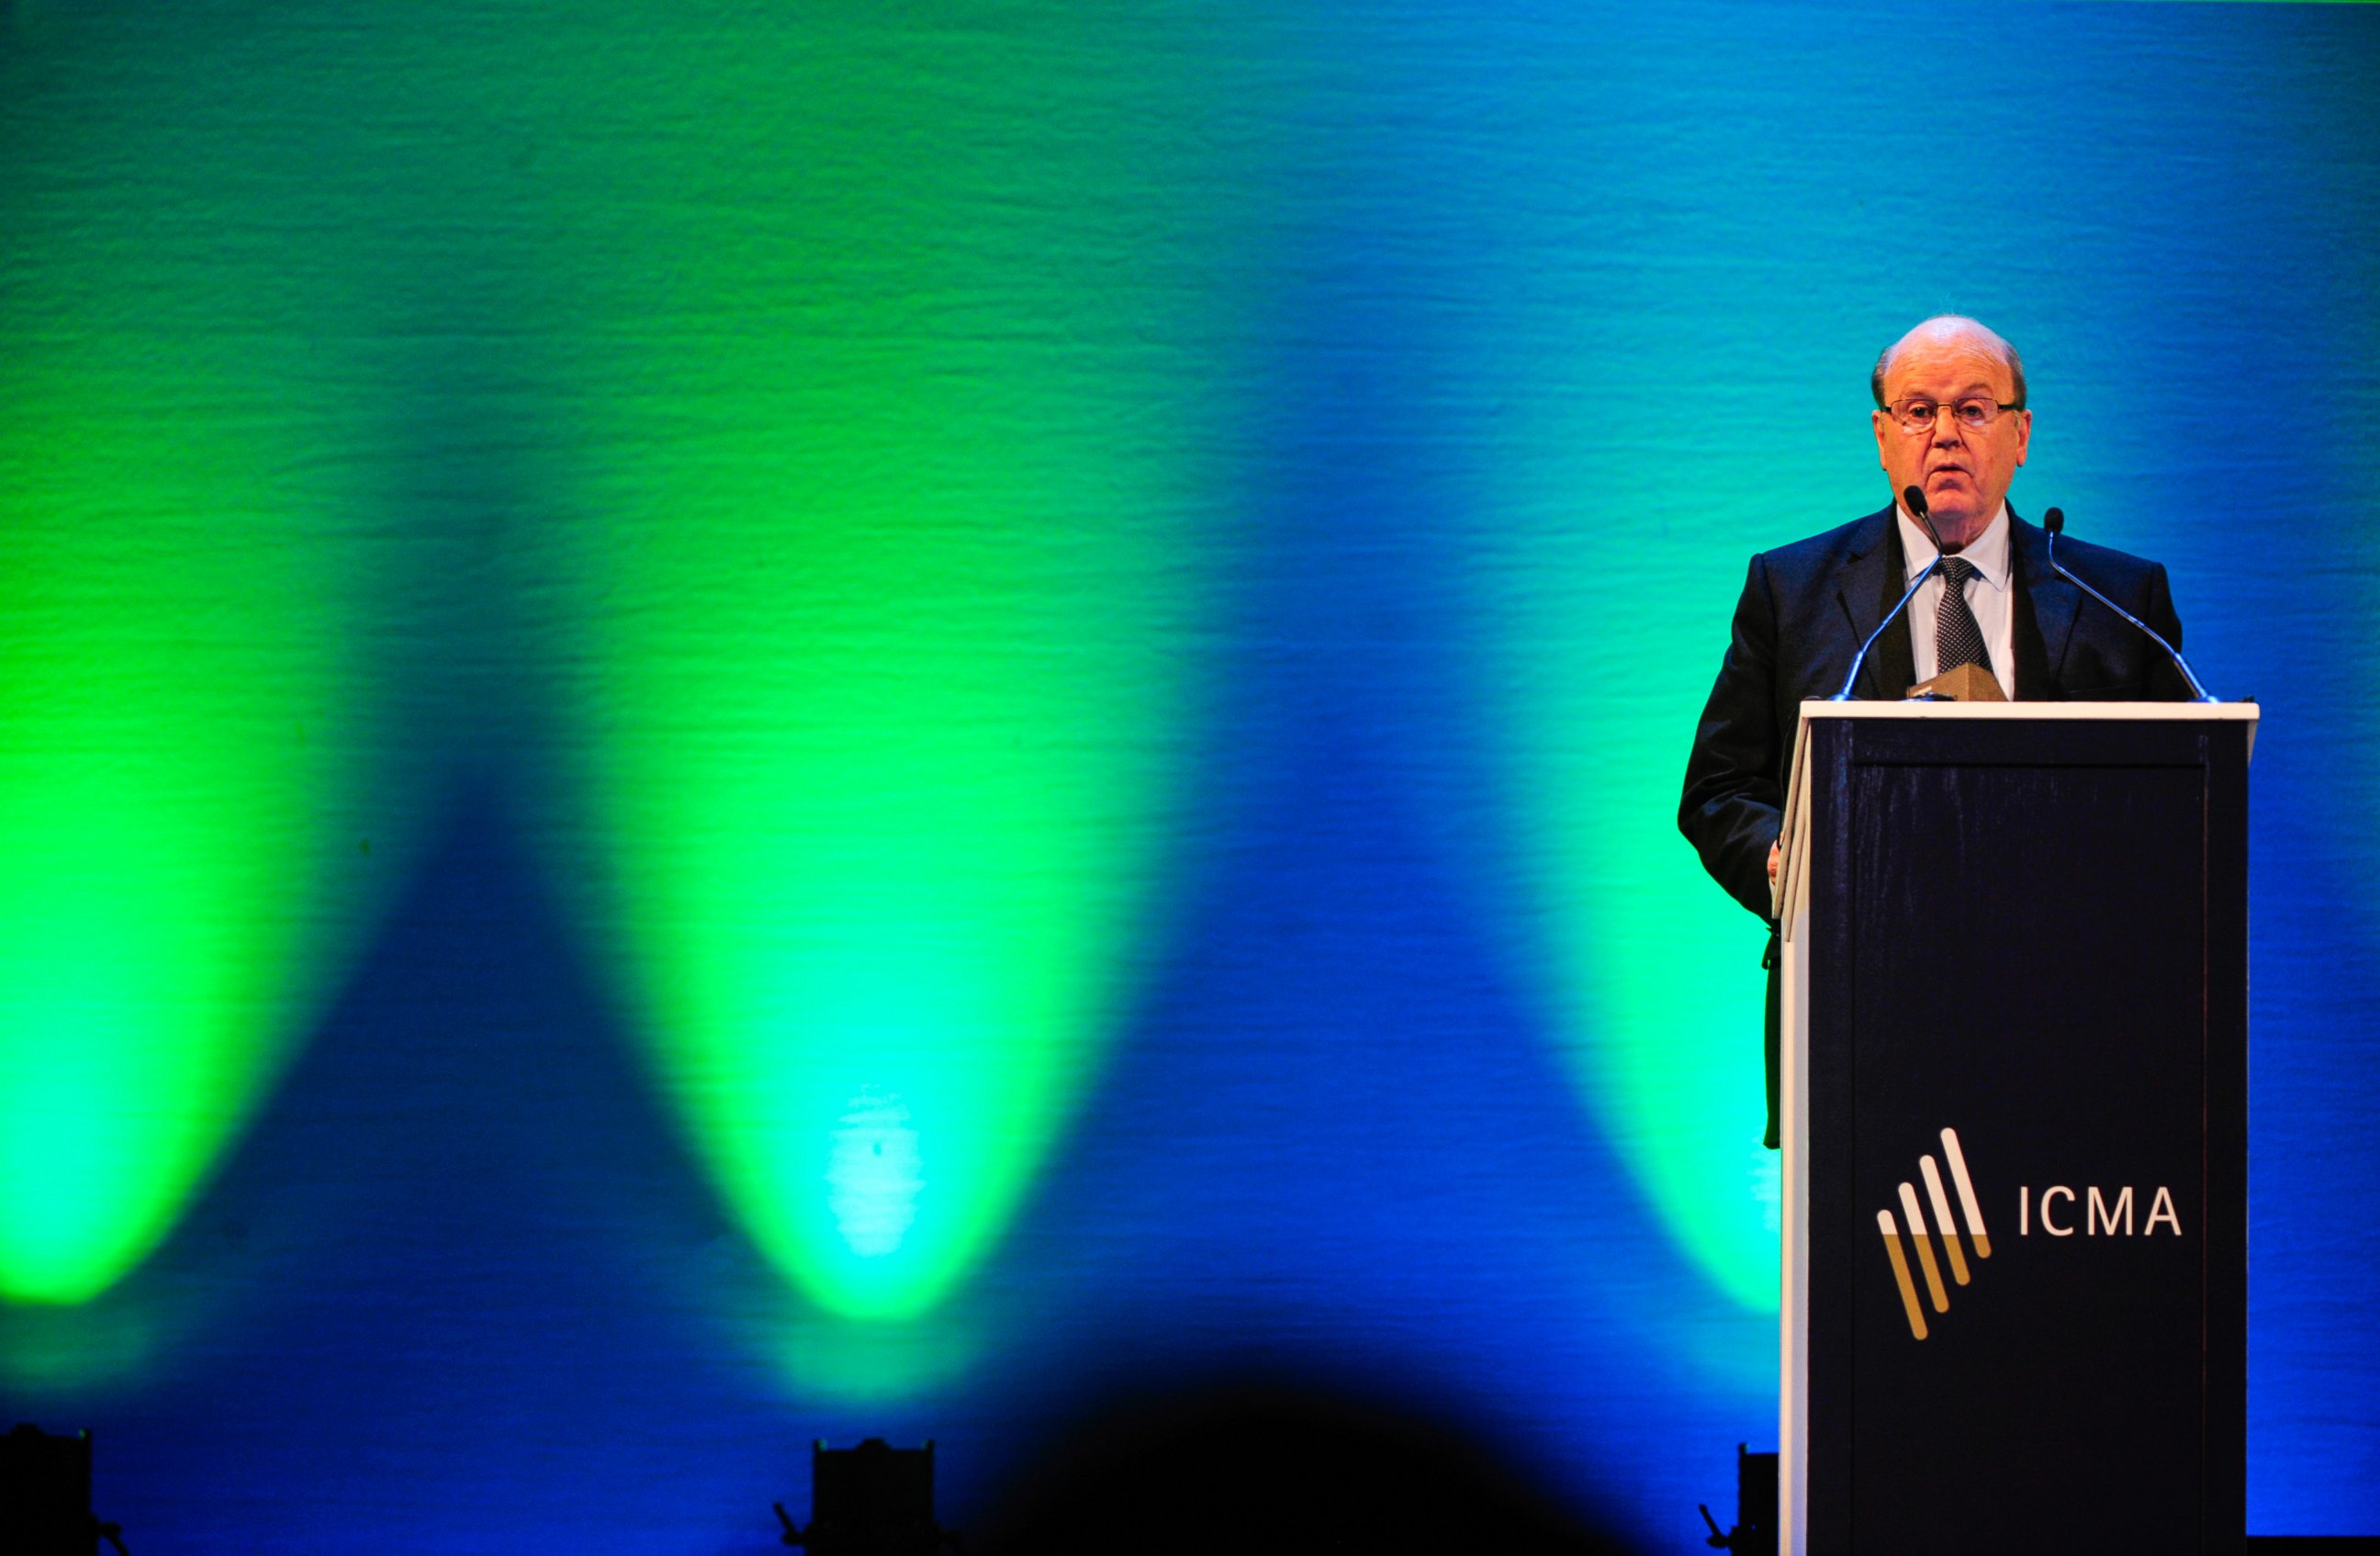 PHOTO: Michael Noonan, Ireland's finance minister, delivers a keynote address at the International Capital Market Association (ICMA) conference in Dublin, Ireland, on May 19, 2016. 